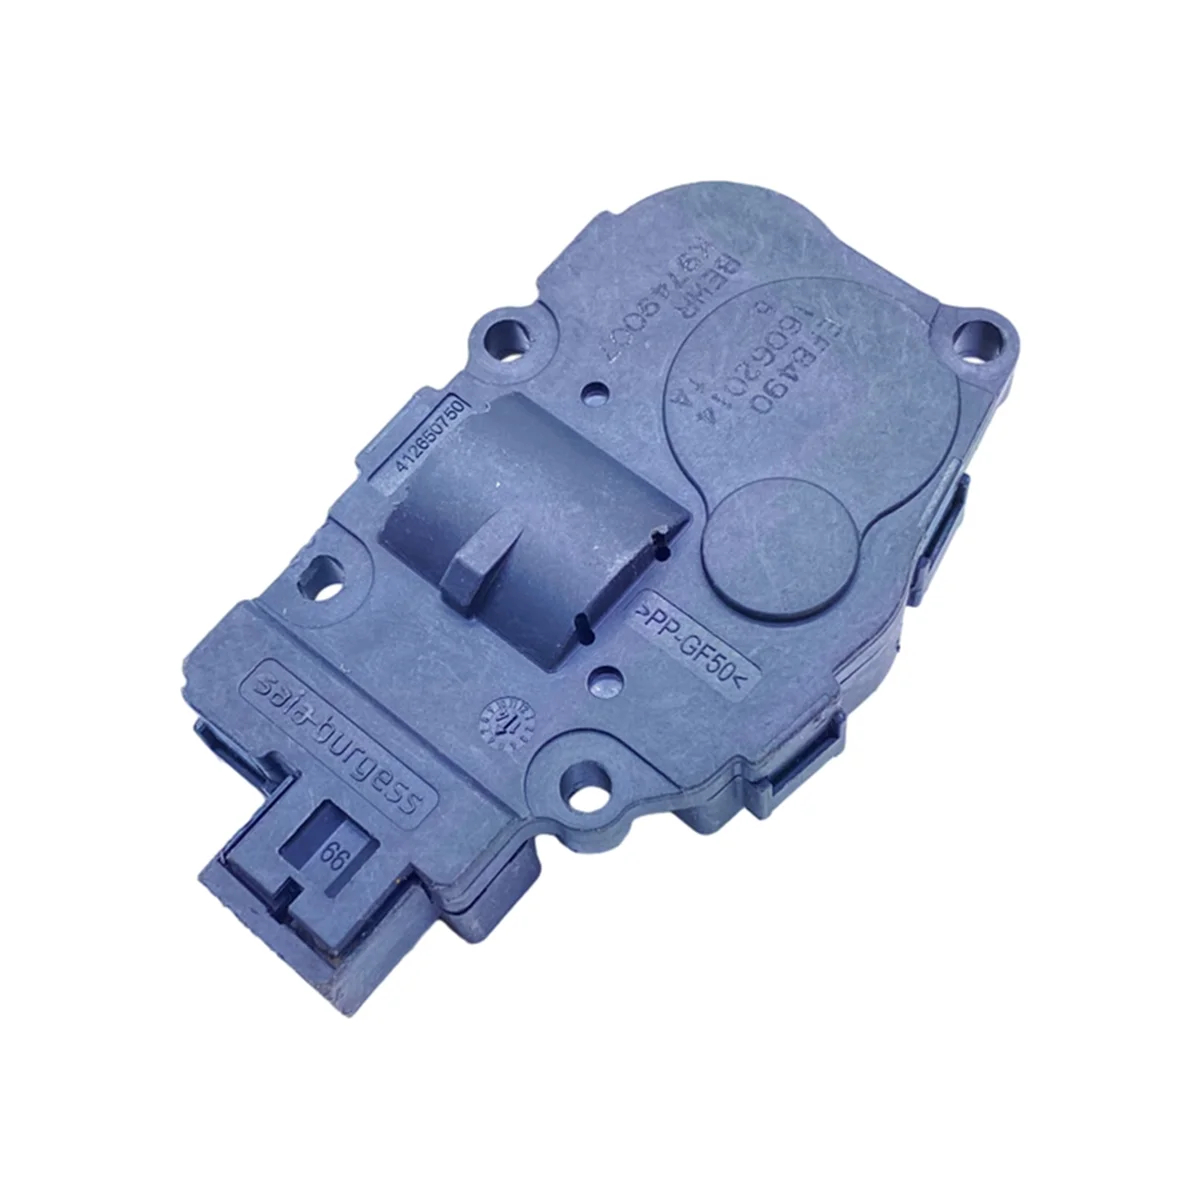 410475520 for Audi for Benz for Bmw Mini Heater Actuator Damper Motor Heater Damper Actuator Regulator Motor 412650750